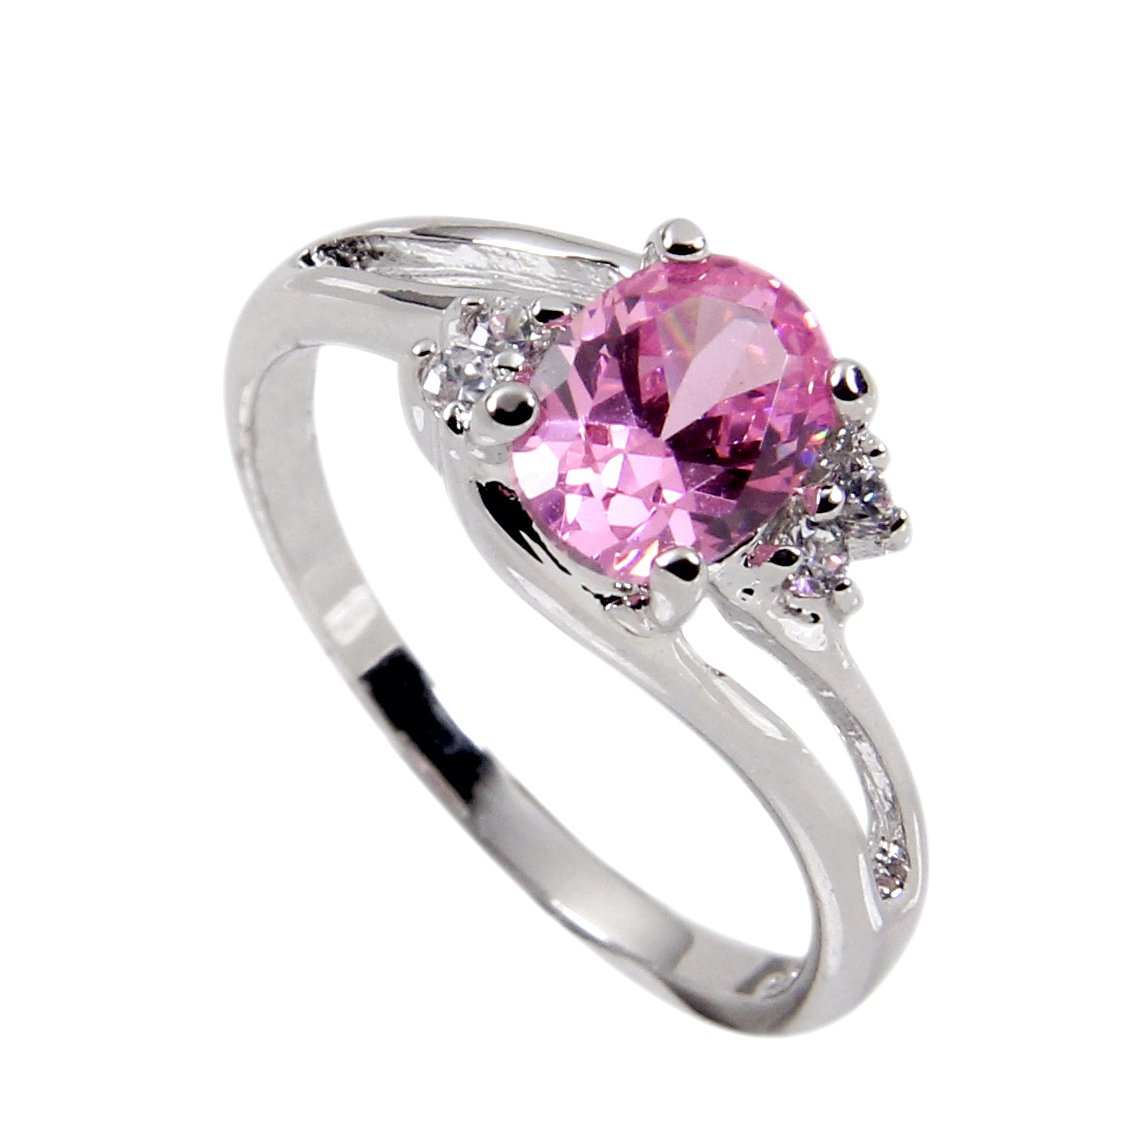 Offset Twist Sterling Silver Oval Pink Stone Ring